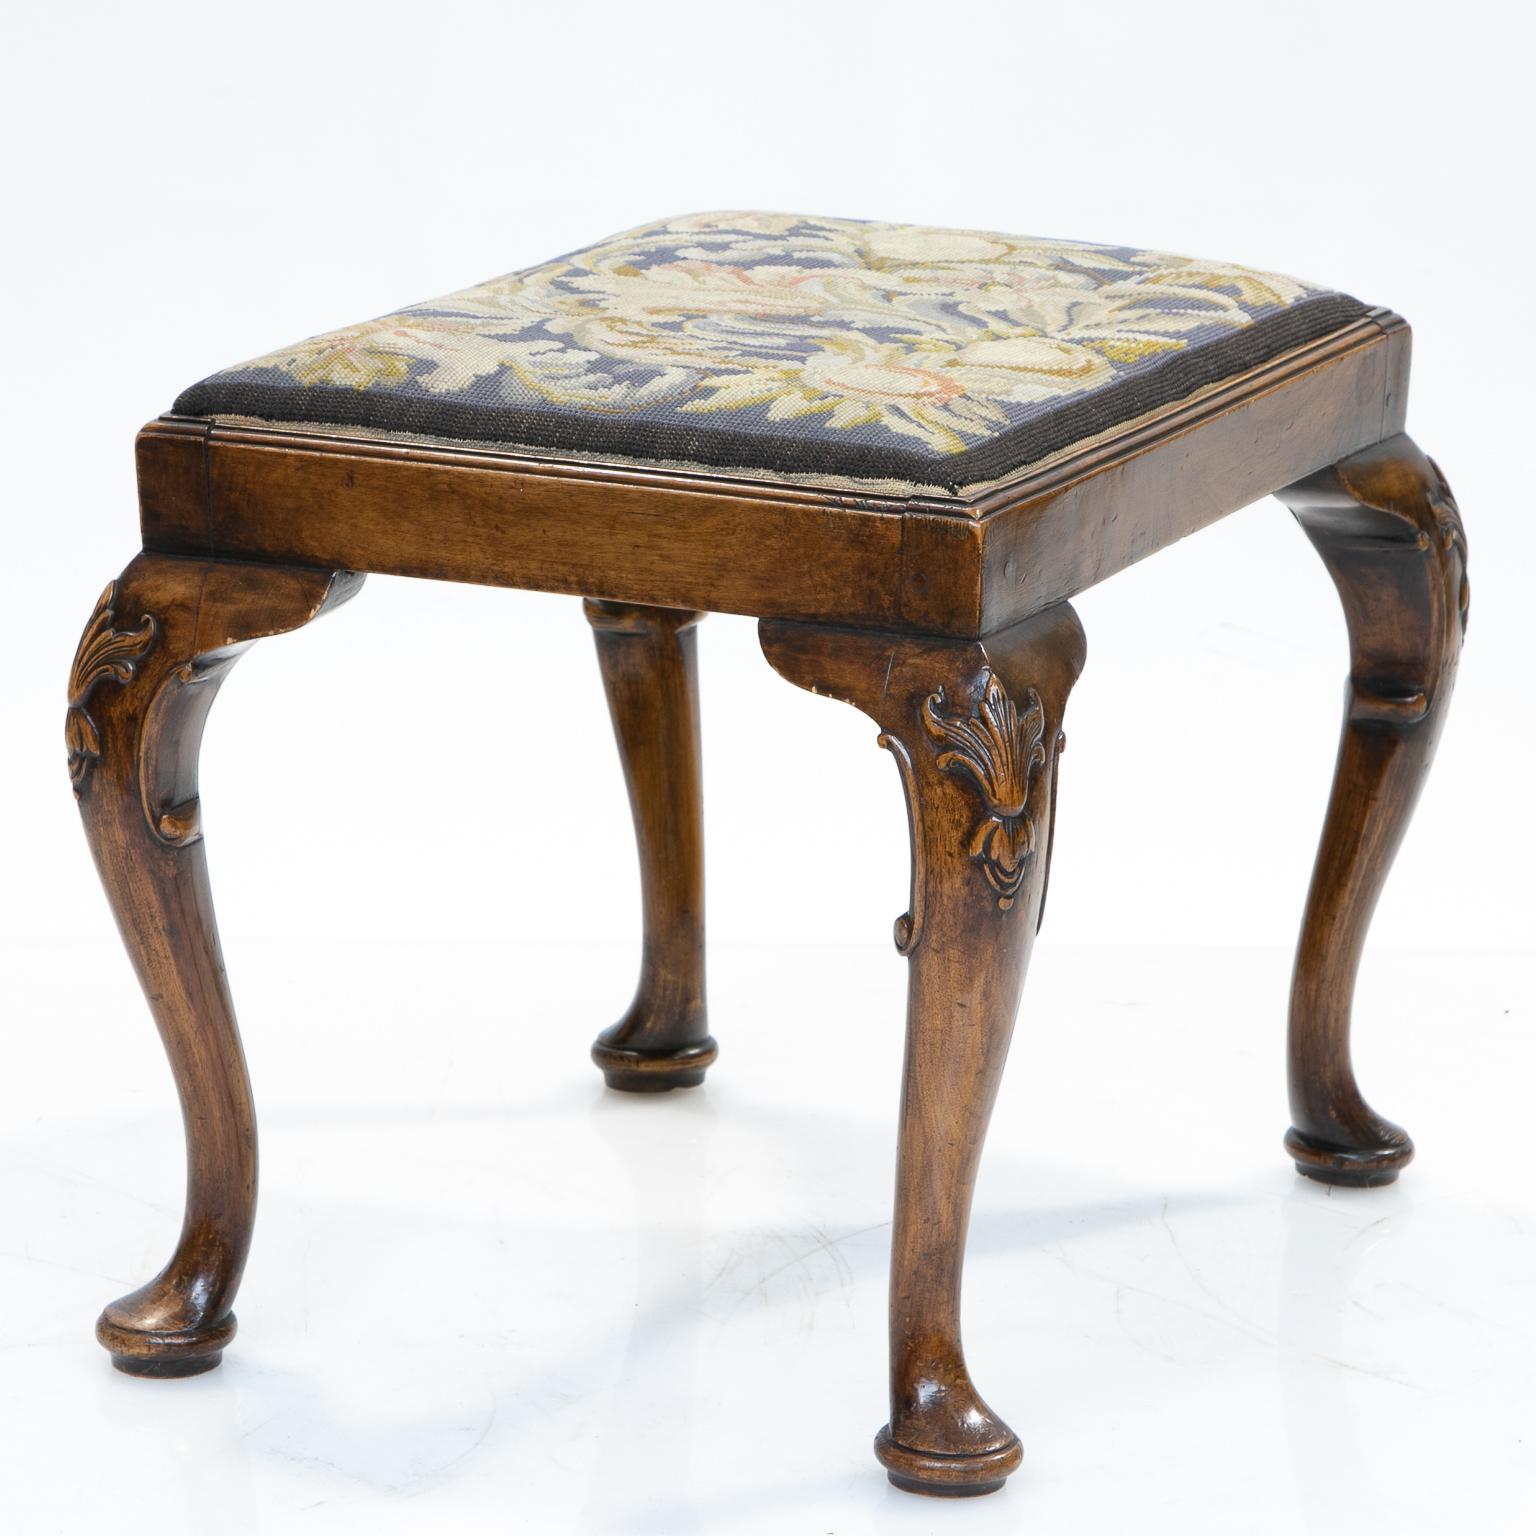 English walnut stool

An excellent English walnut stool with needlepoint covering. The frame is strong and sturdy. There are four cabriole legs with carved knees and scrolls and ending with pad feet. Beautiful patina and color of the walnut.